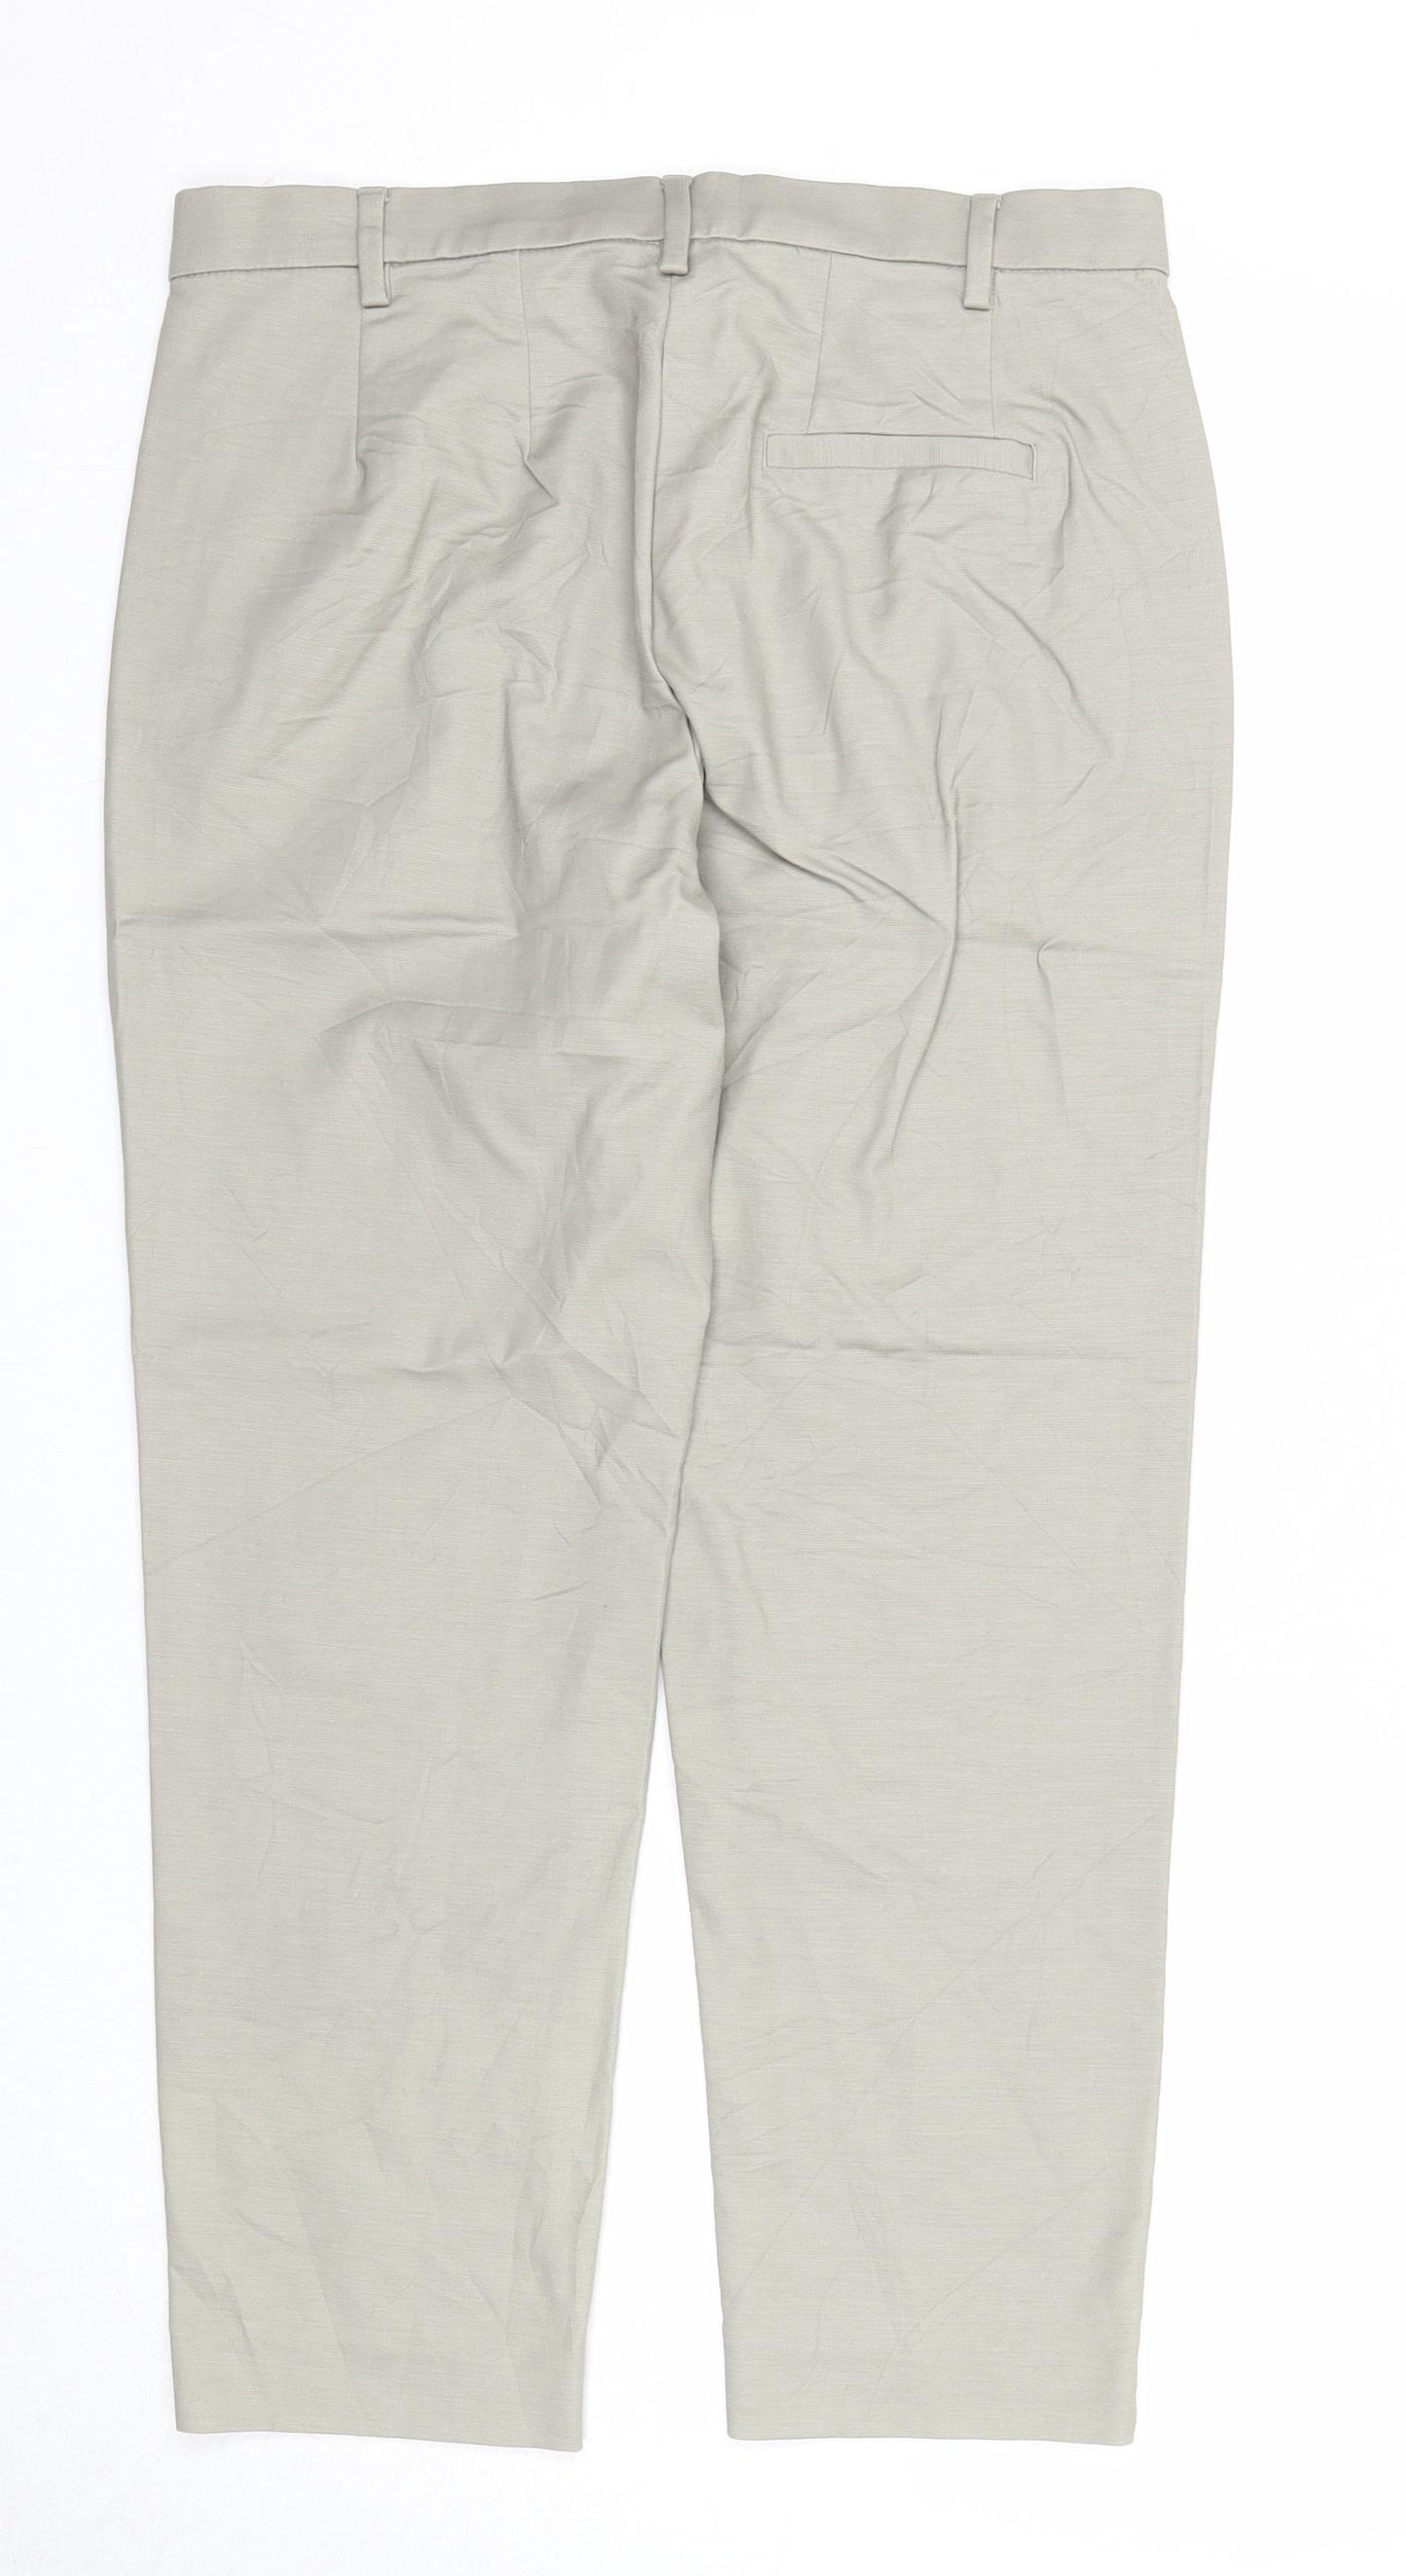 Marks and Spencer Womens Grey Cotton Chino Trousers Size 12 Regular Zip